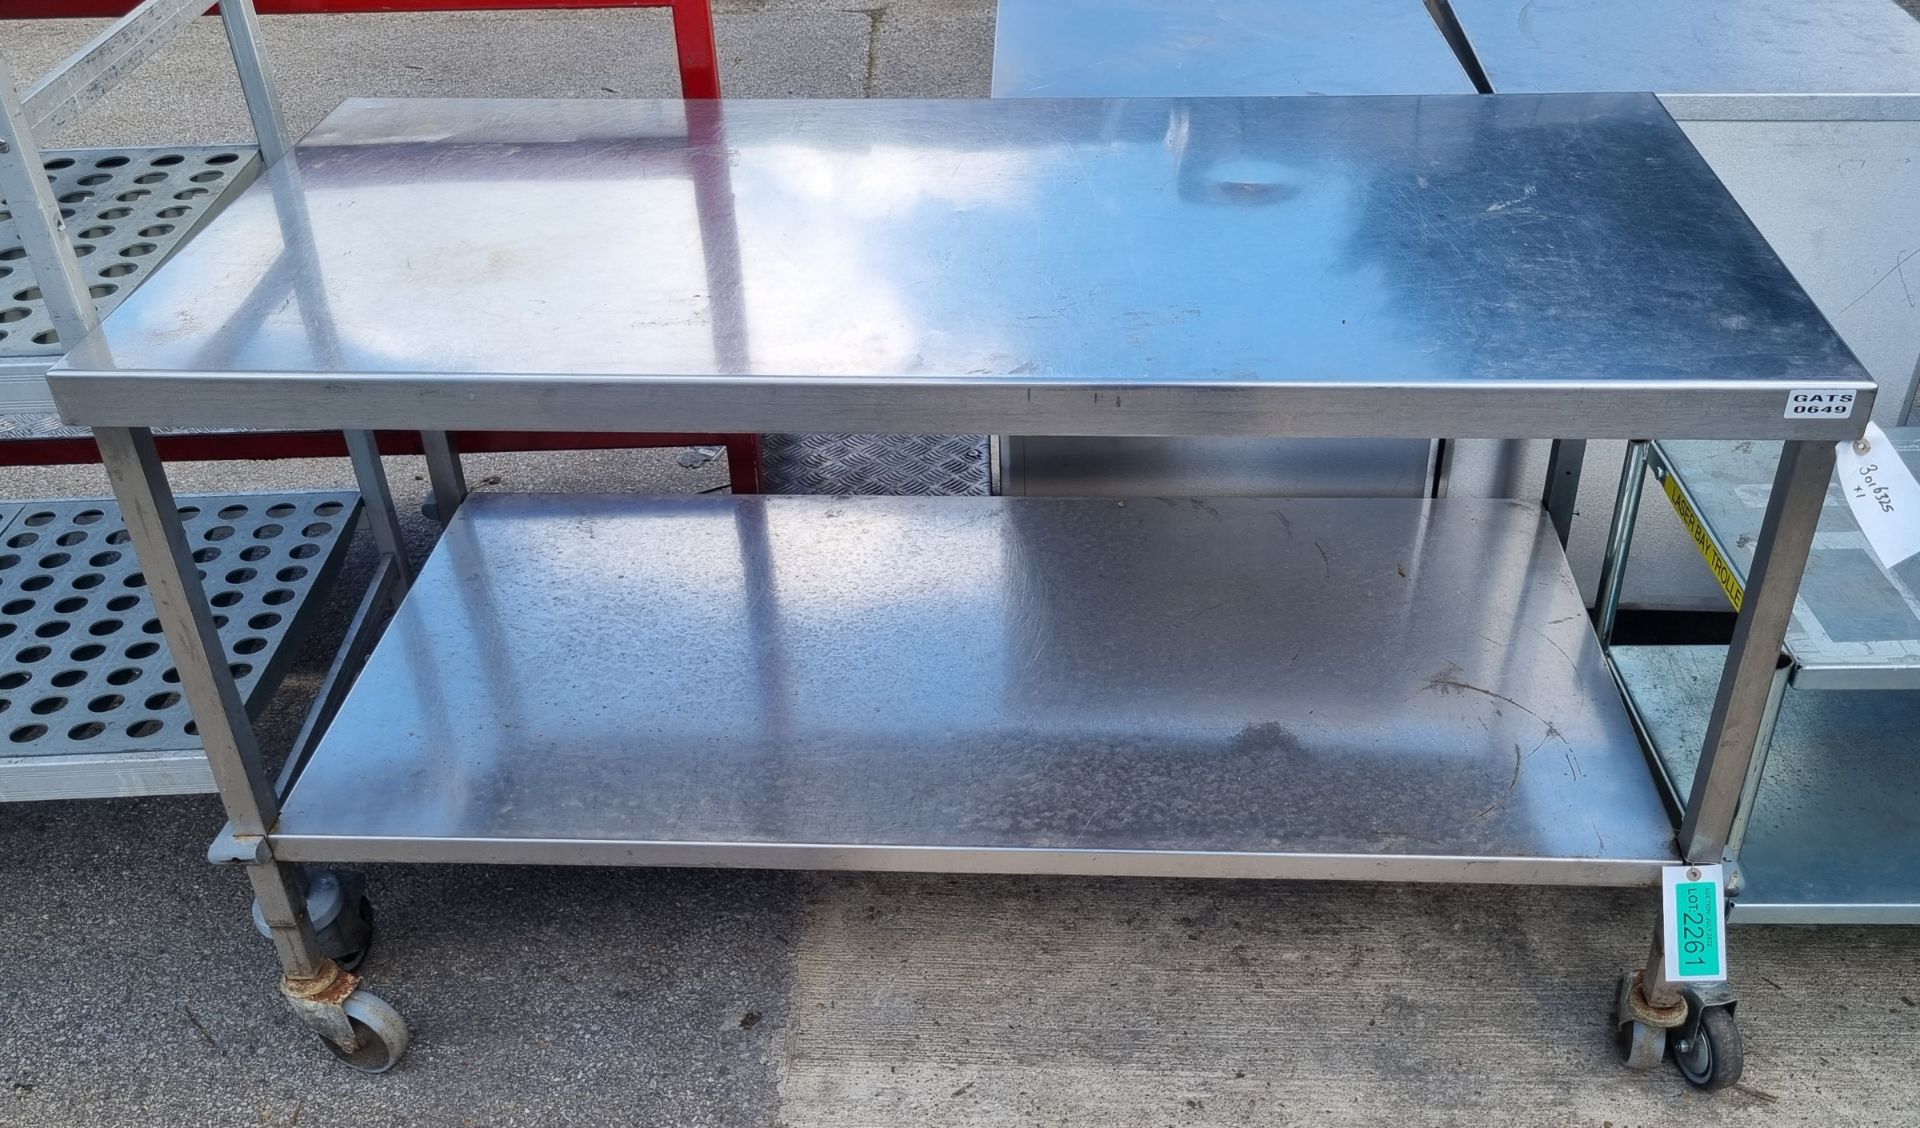 Stainless Steel Catering Counter top - L147 x W70 x H85cm